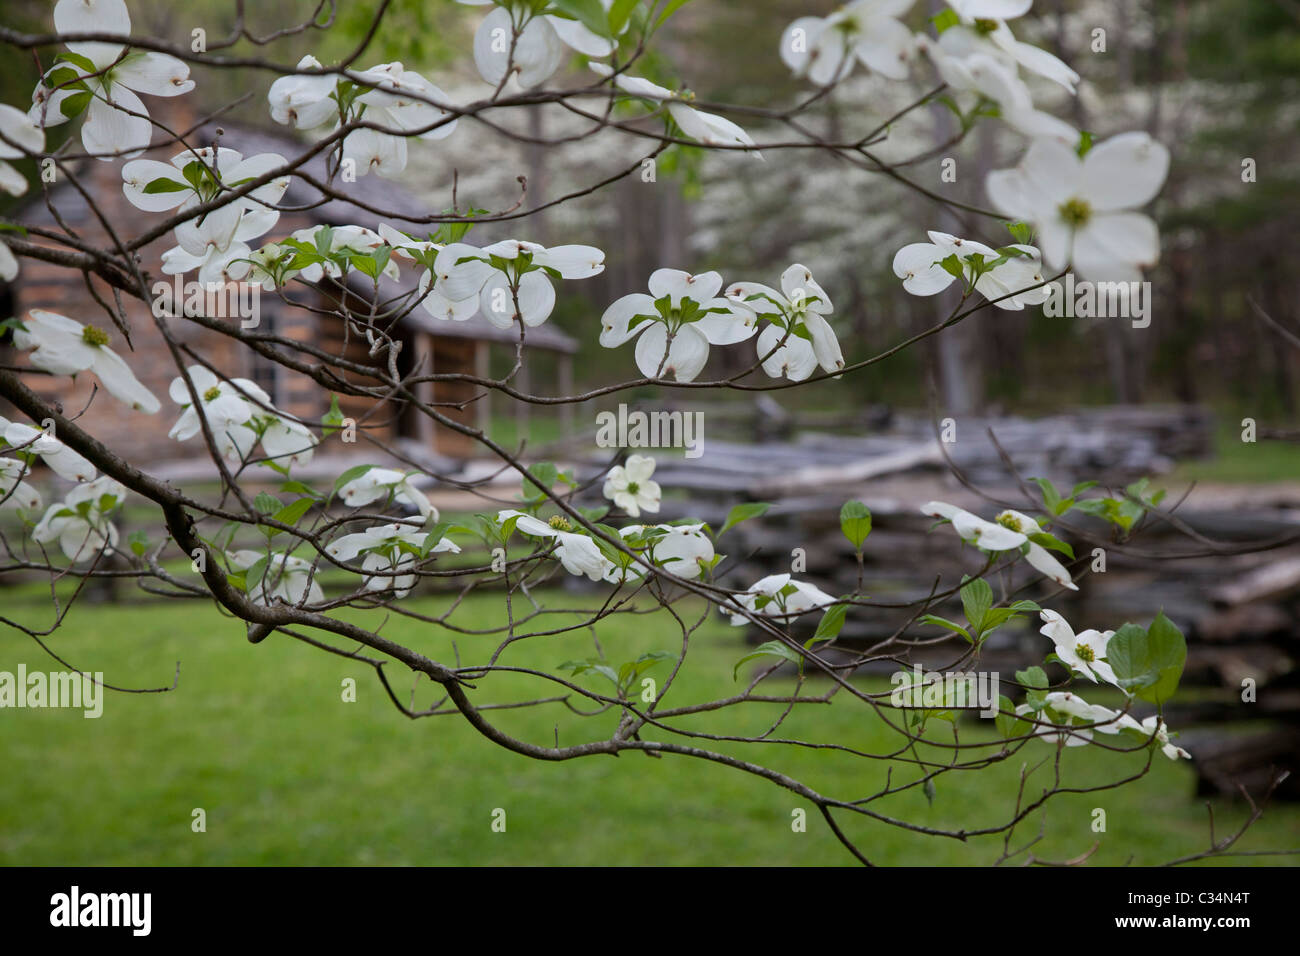 Great Smoky Mountains National Park, Tennessee - Dogwood blooming at the John Oliver Place in Cades Cove. Stock Photo